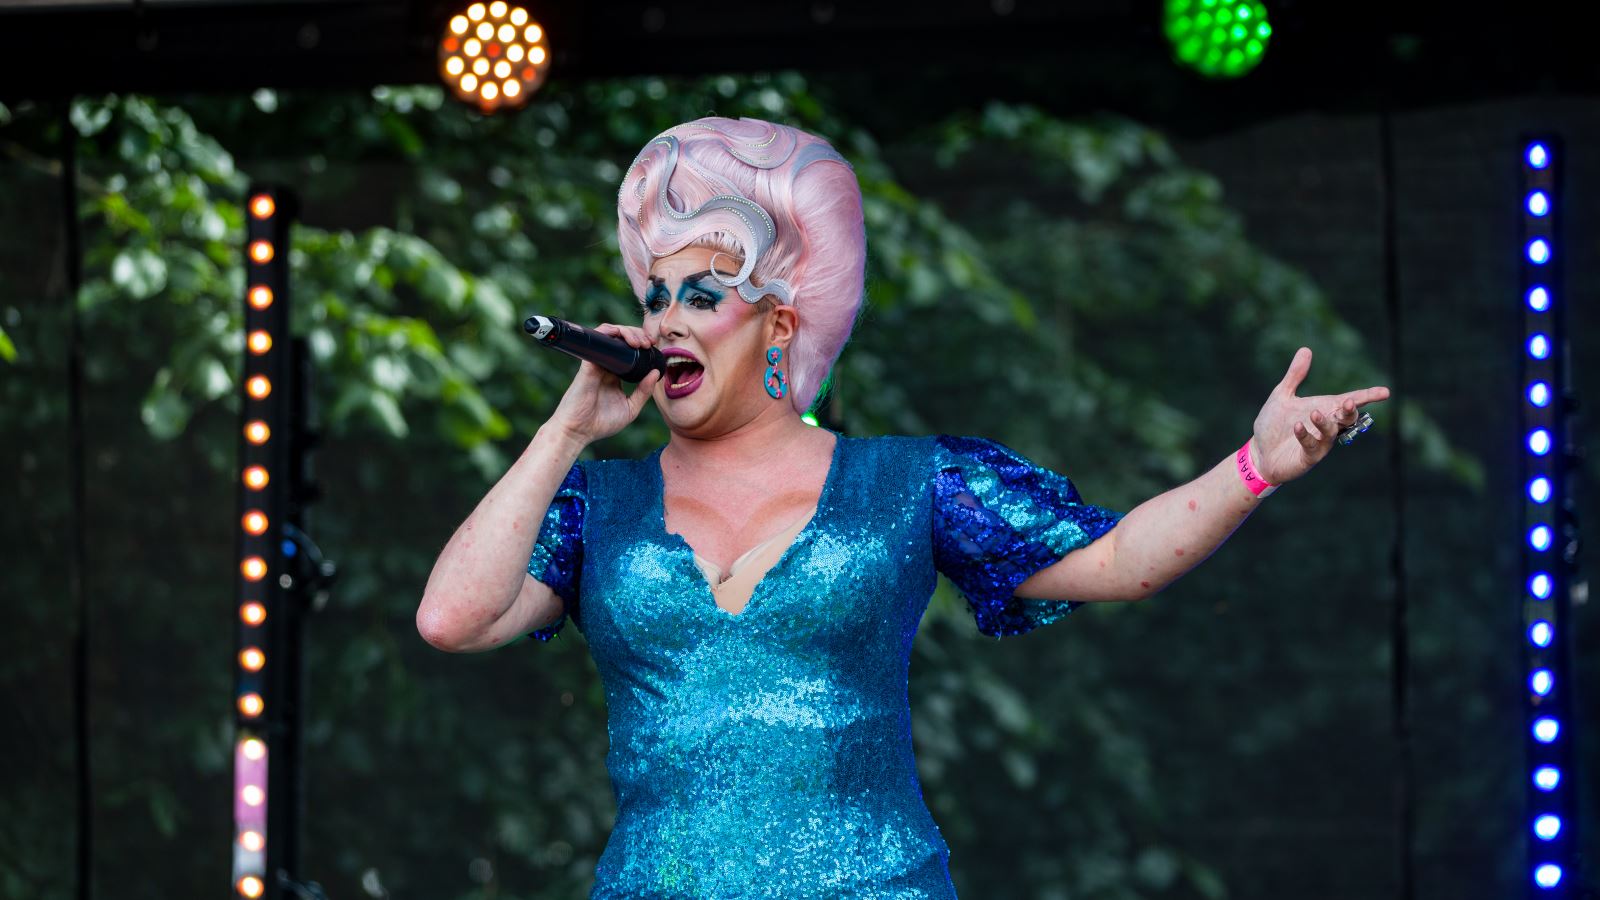 A drag queen in a blue dress on an outdoor stage